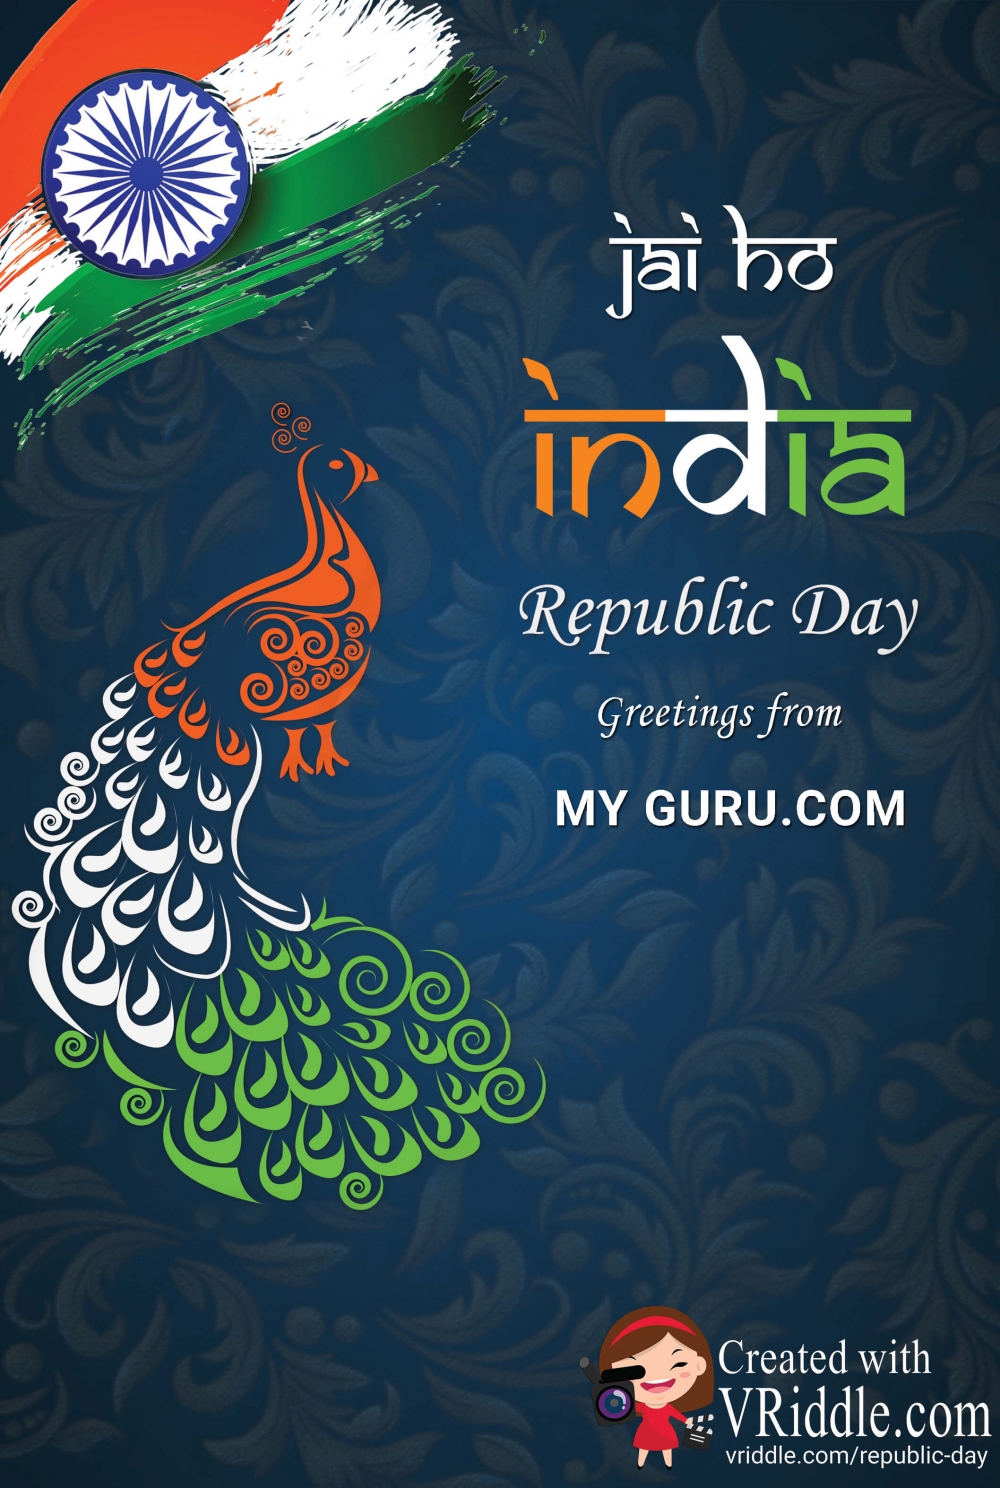 Republic day wishes and greetings card